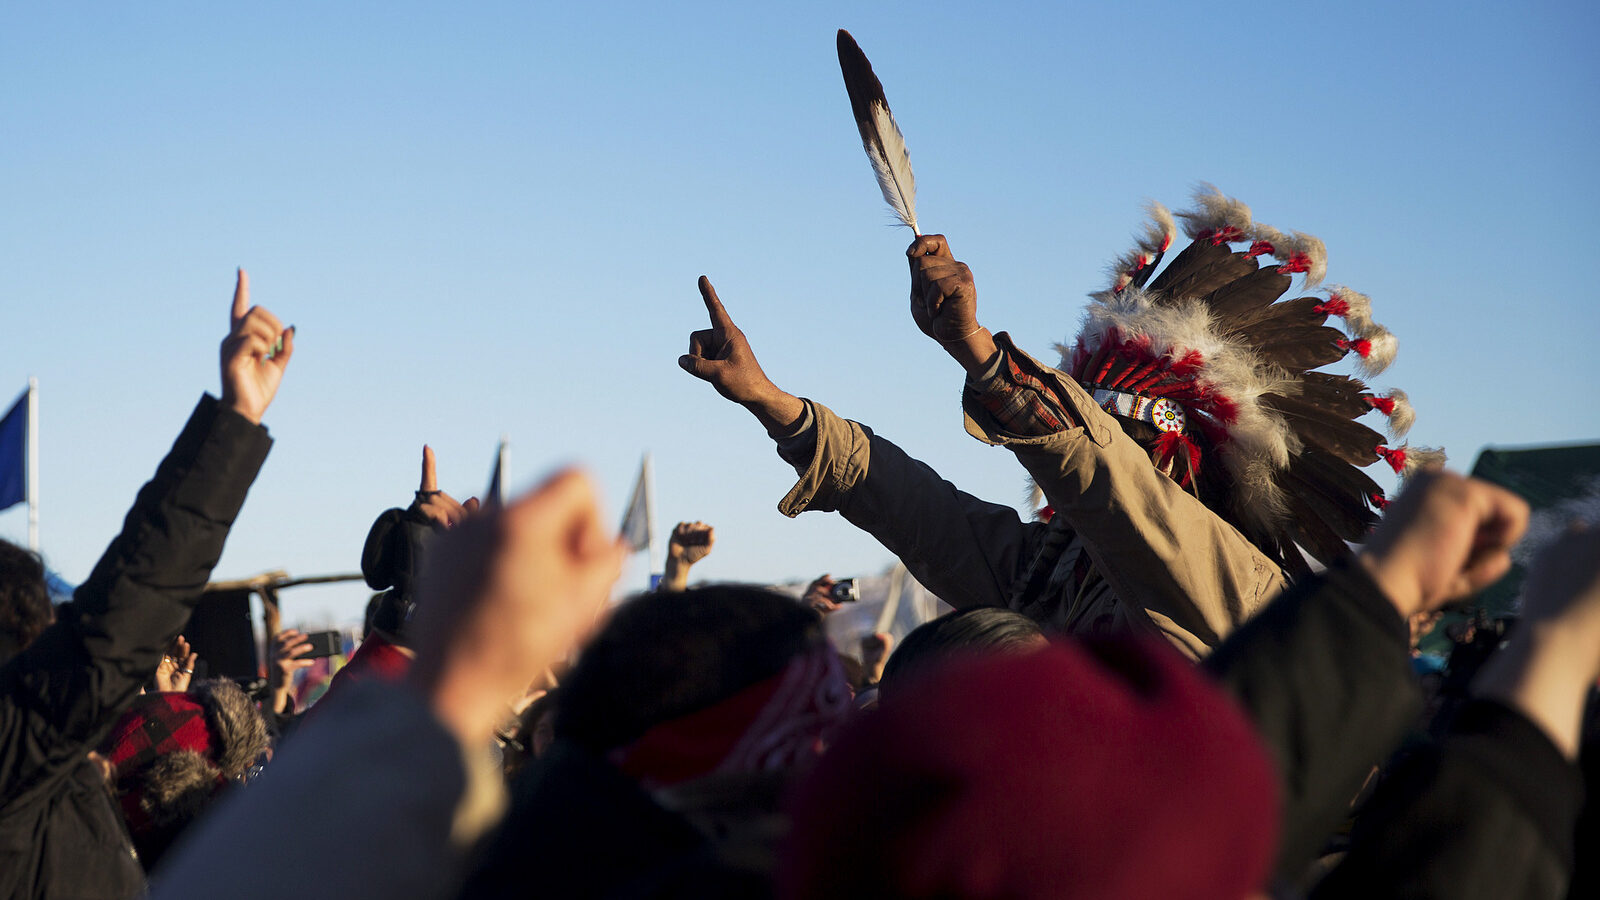 A crowd gathers in celebration at the Oceti Sakowin camp after it was announced that the U.S. Army Corps of Engineers won't grant easement for the Dakota Access oil pipeline in Cannon Ball, N.D., Sunday, Dec. 4, 2016. (AP Photo/David Goldman)